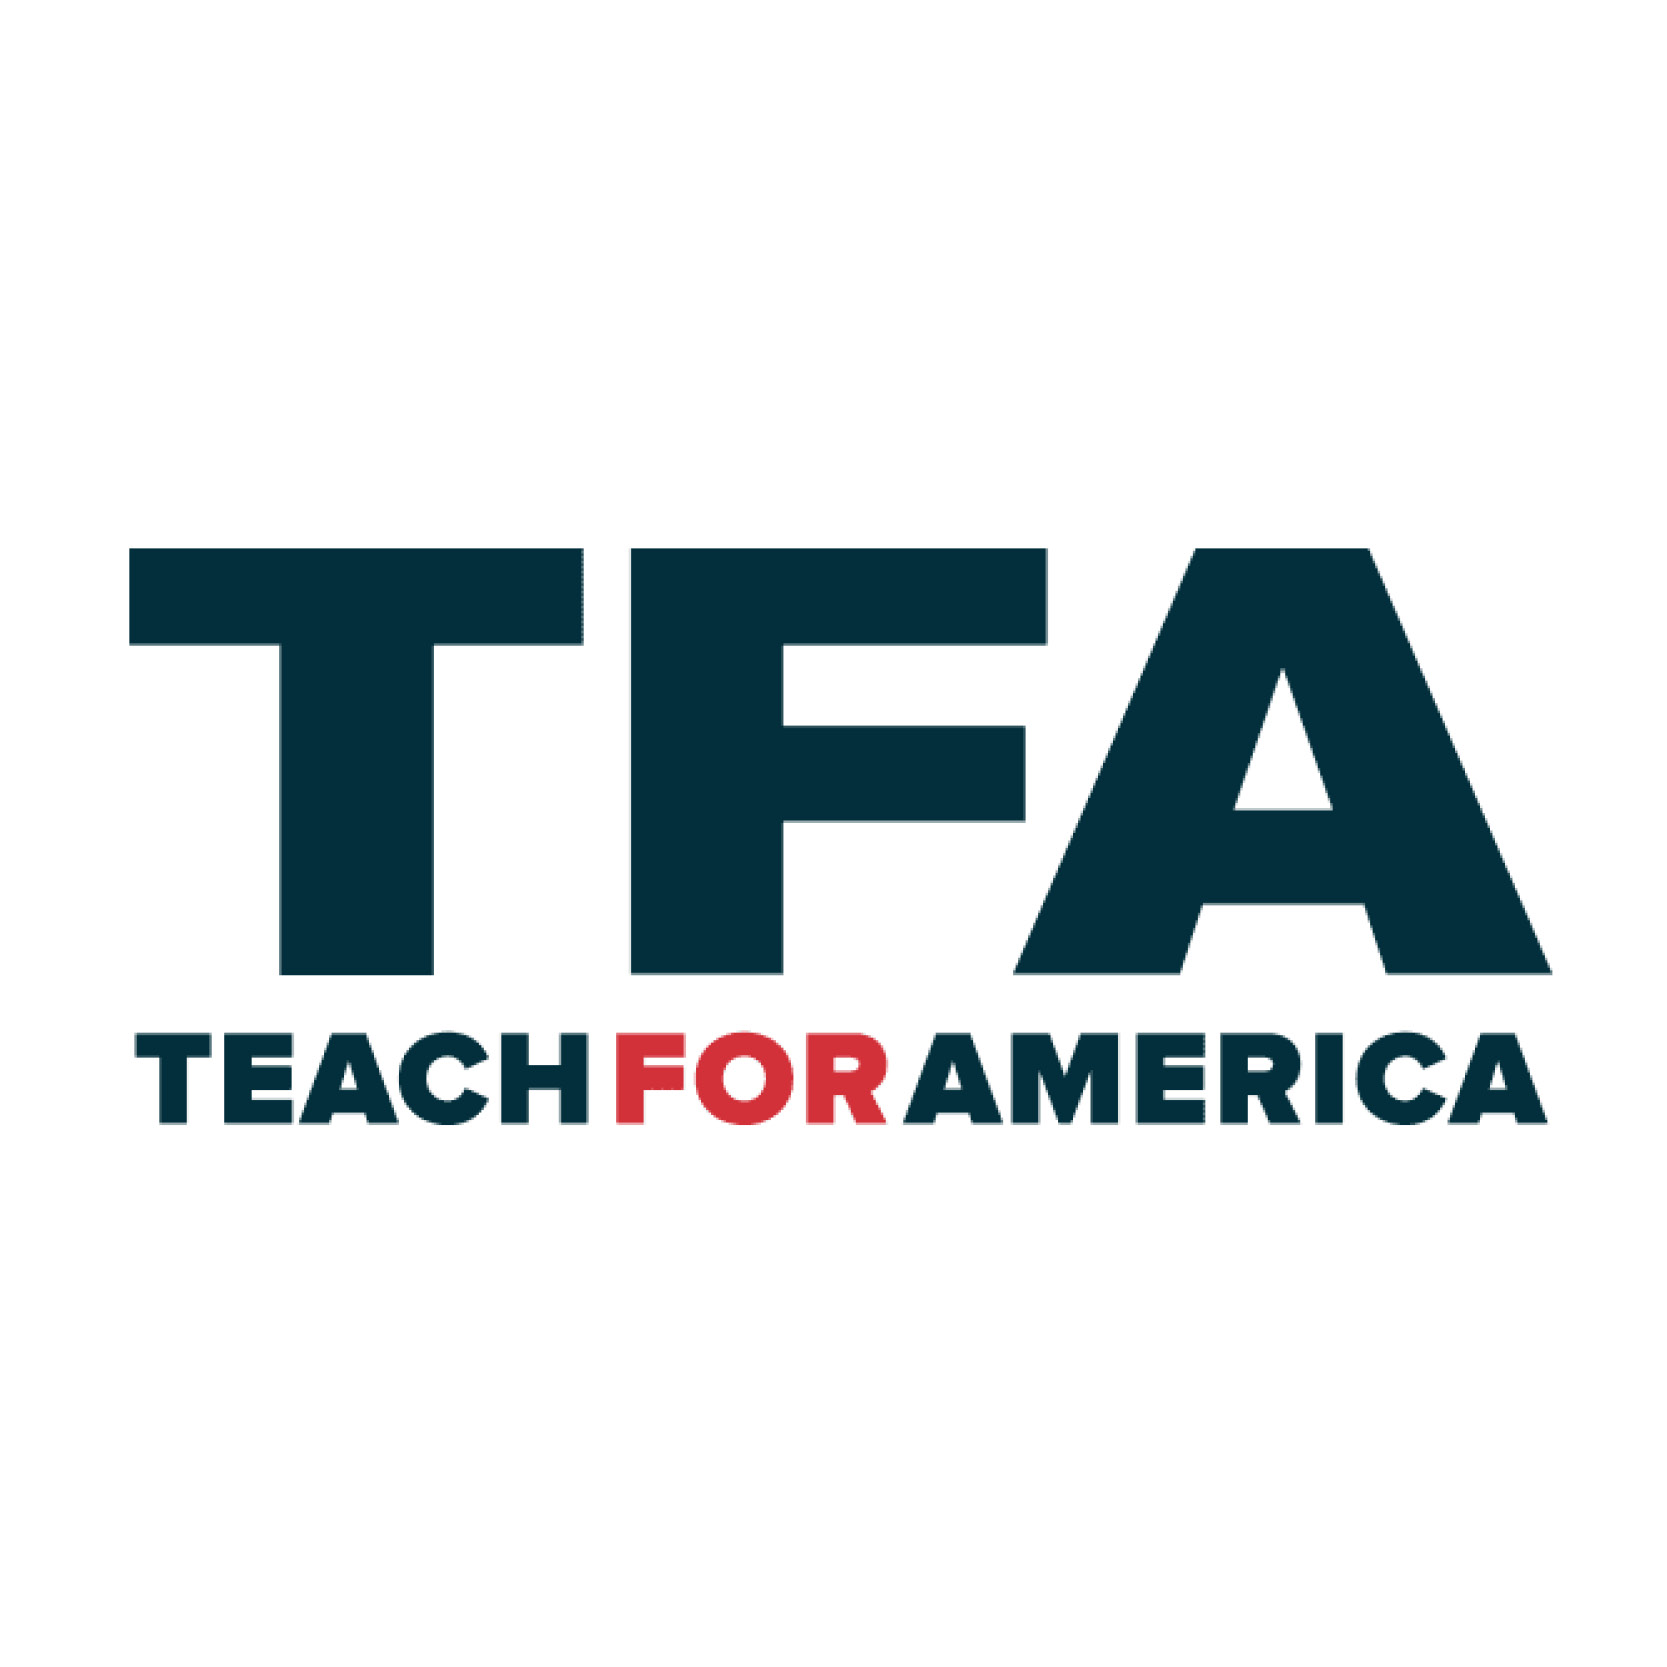 Teach for America, Inc. United Way of Greater Nashville